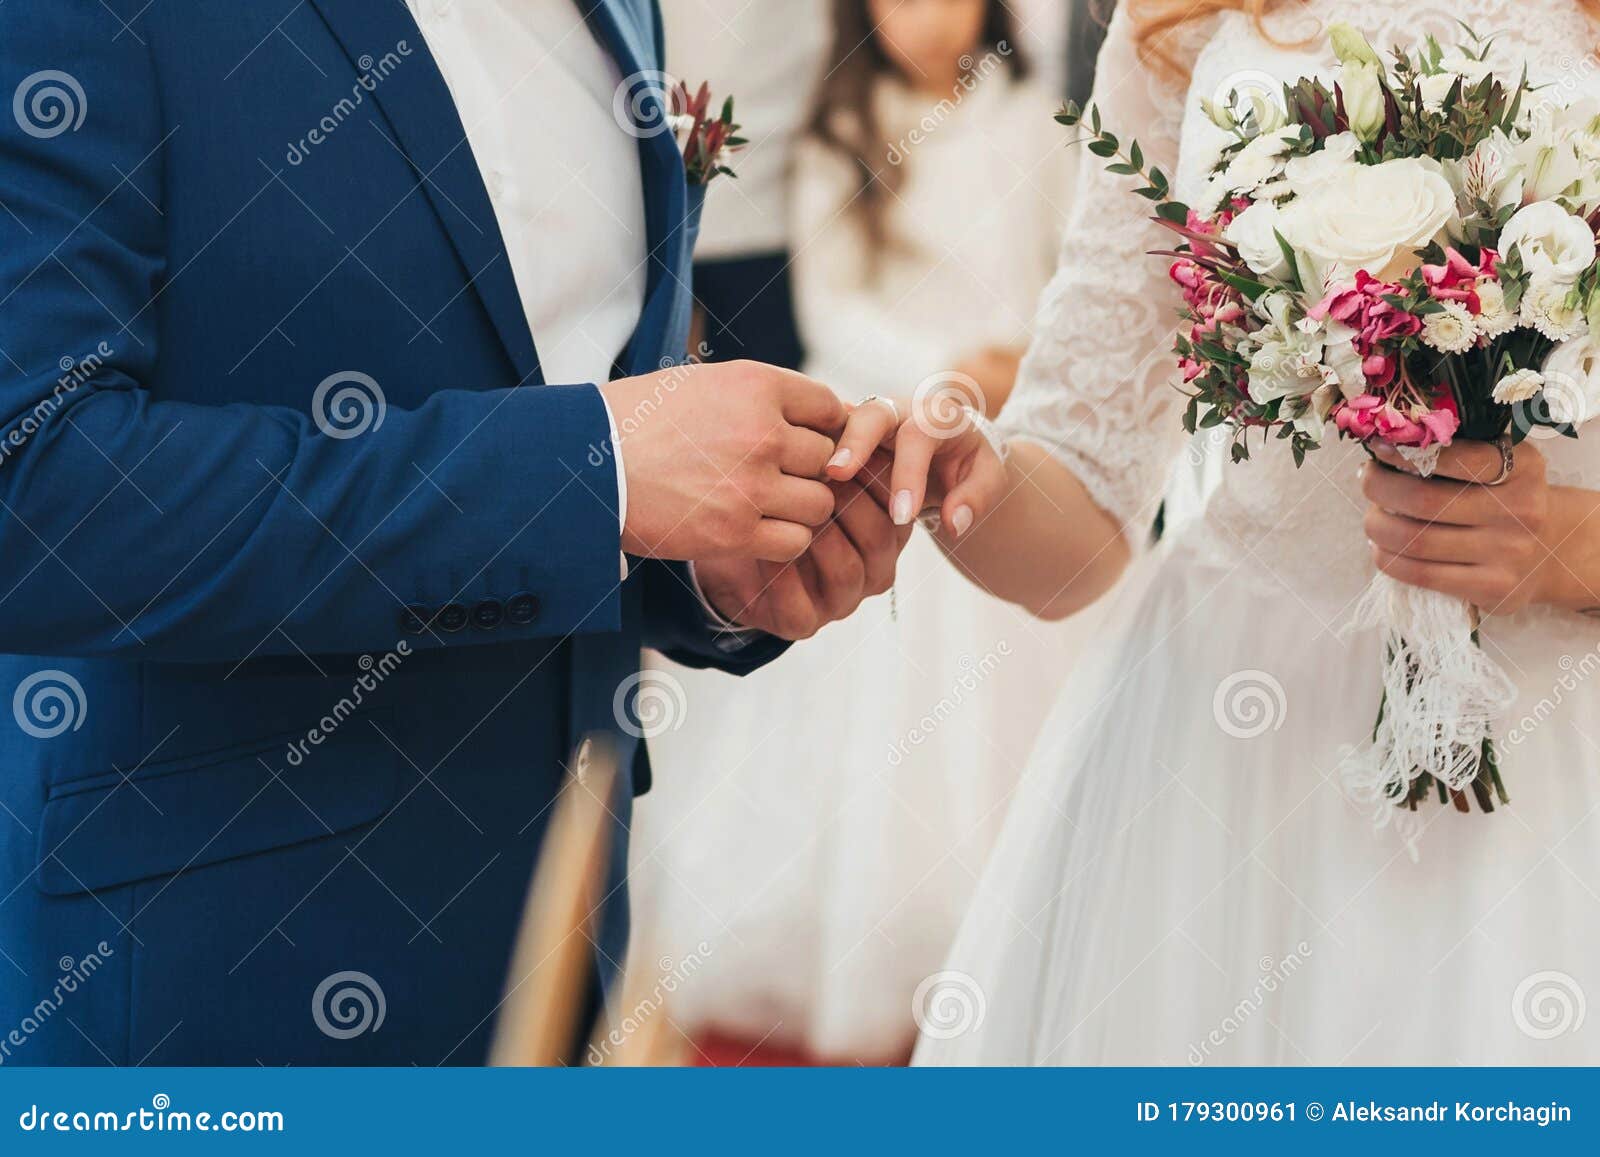 Traditional Wedding Ceremony of Exchange of Gold Rings between the ...